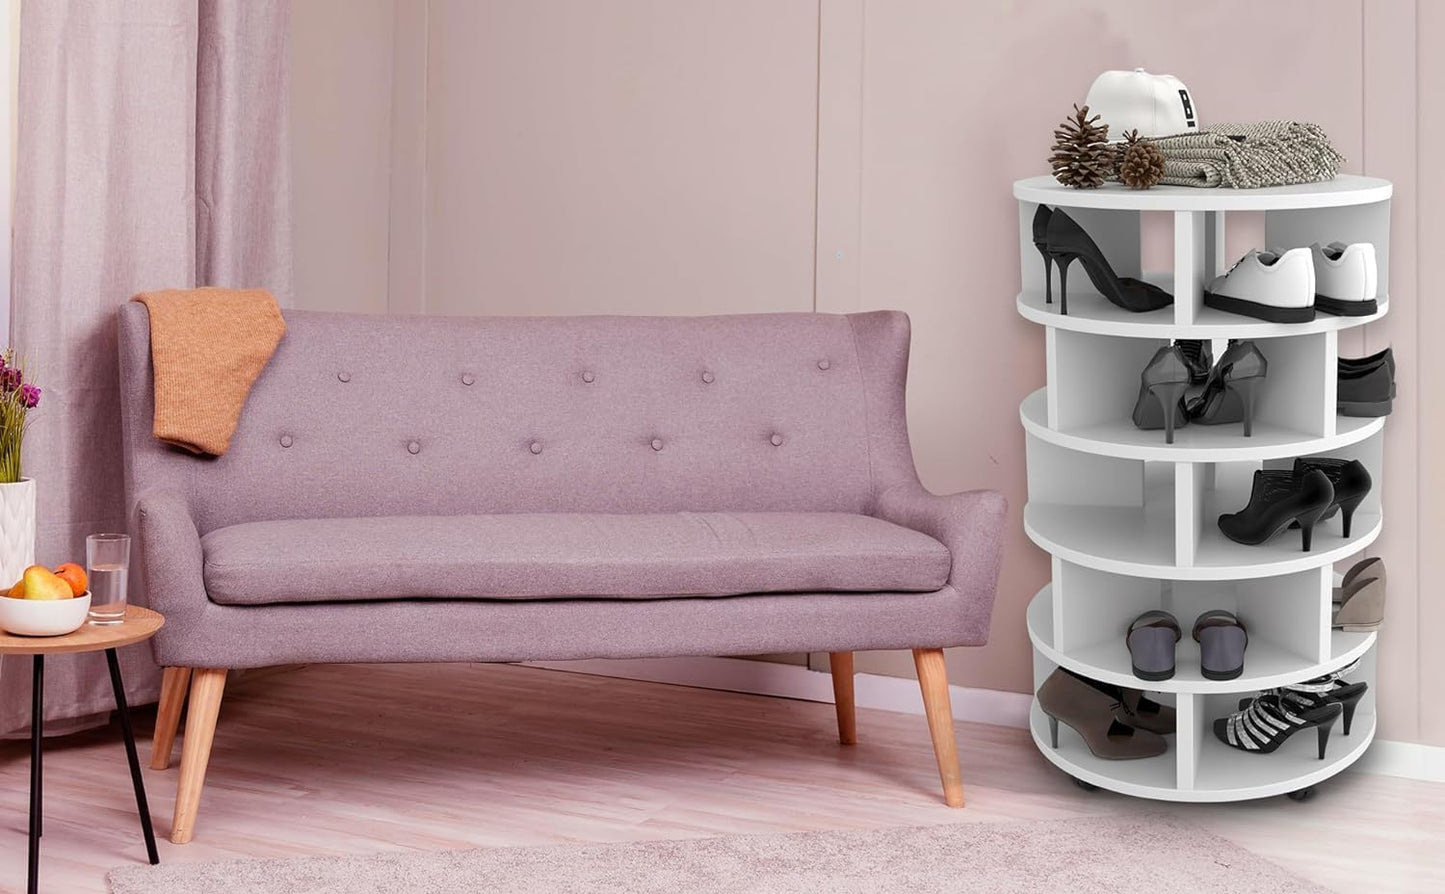 Rotating Shoe Rack, 6 tier with wheels, Round